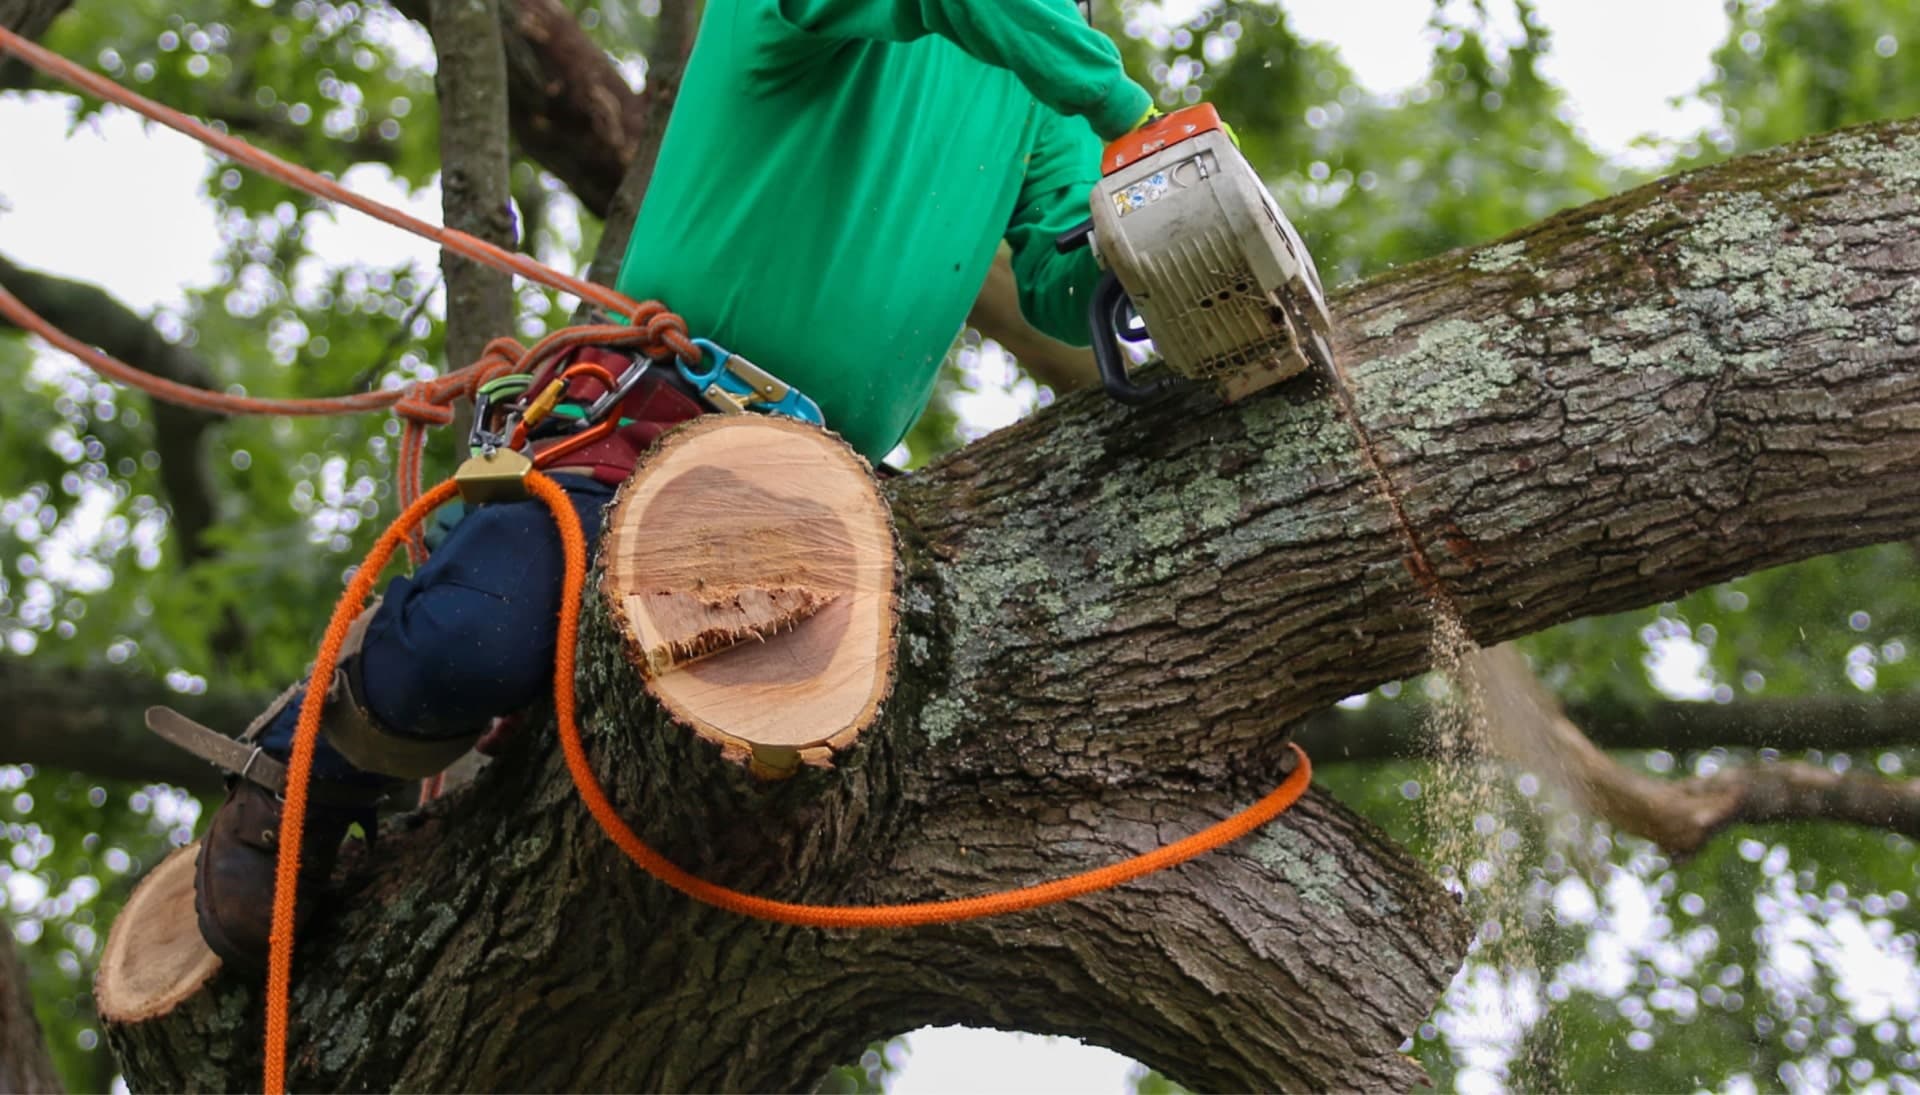 Shed your worries away with best tree removal in Omaha